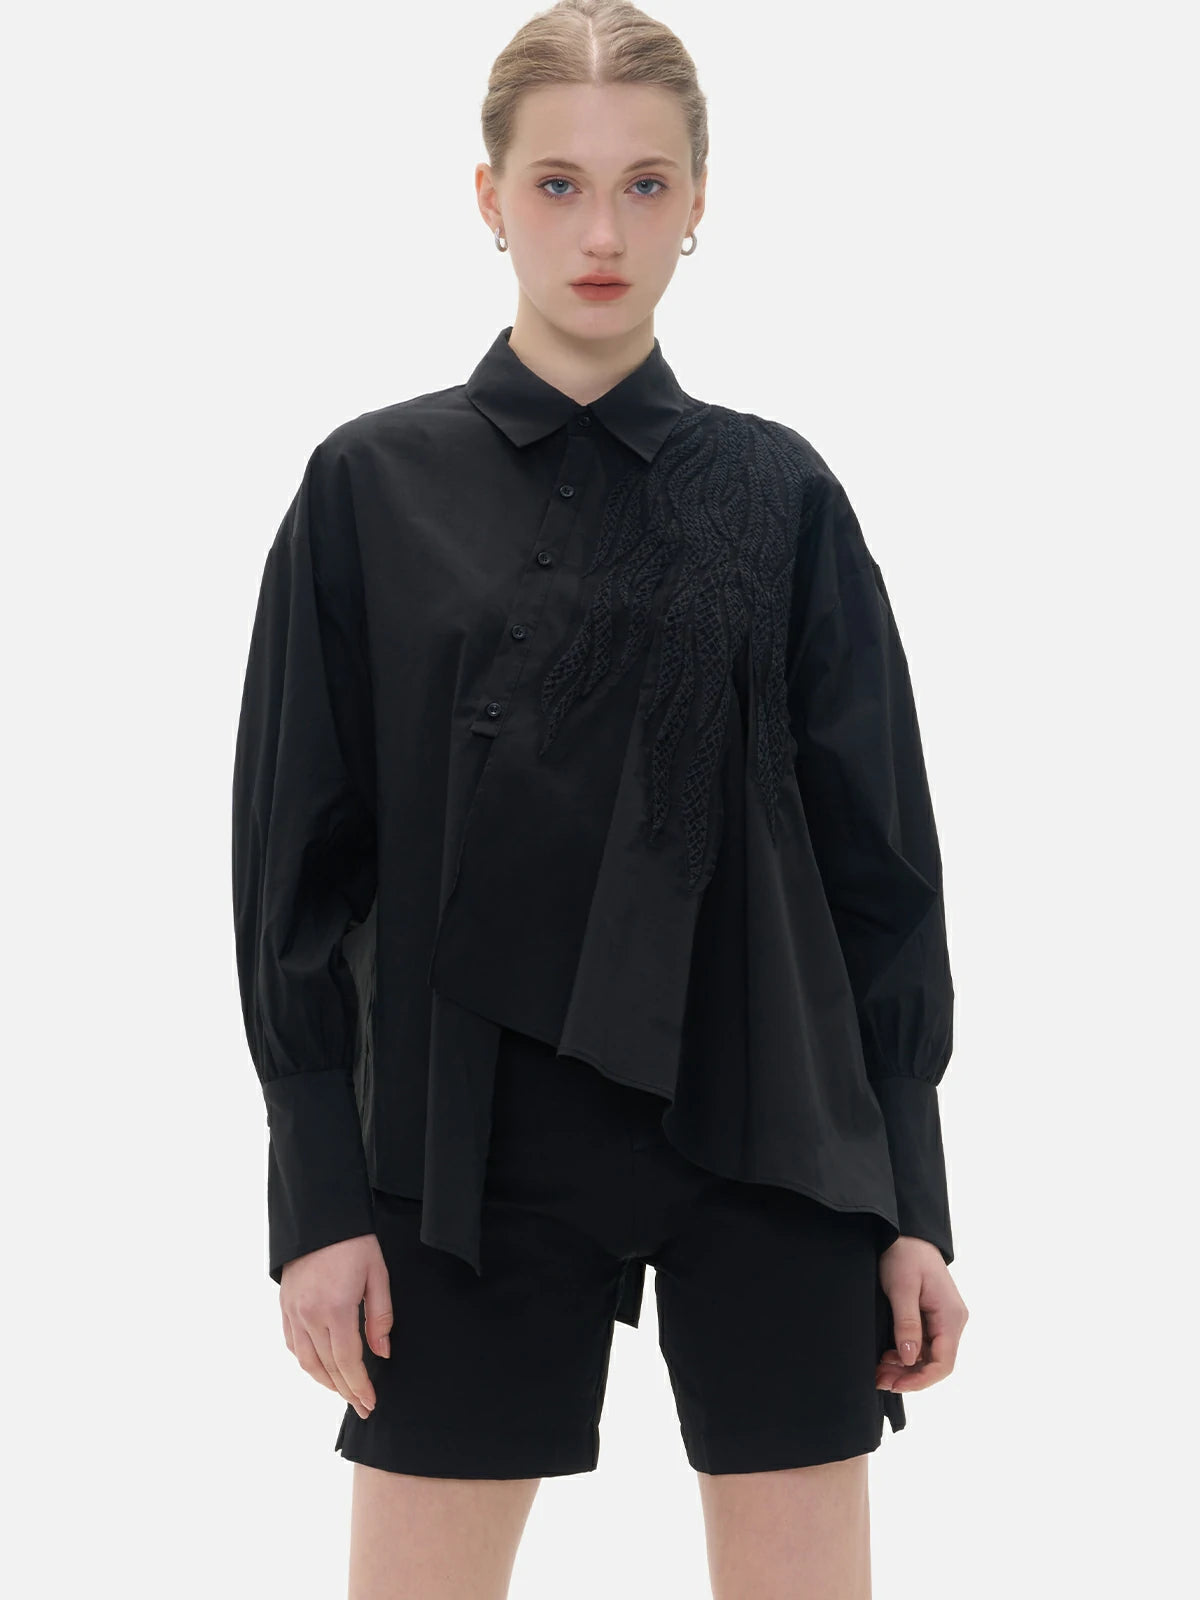 Fashionable black shirt with a front irregular cut, back slit, and diagonal button closure.